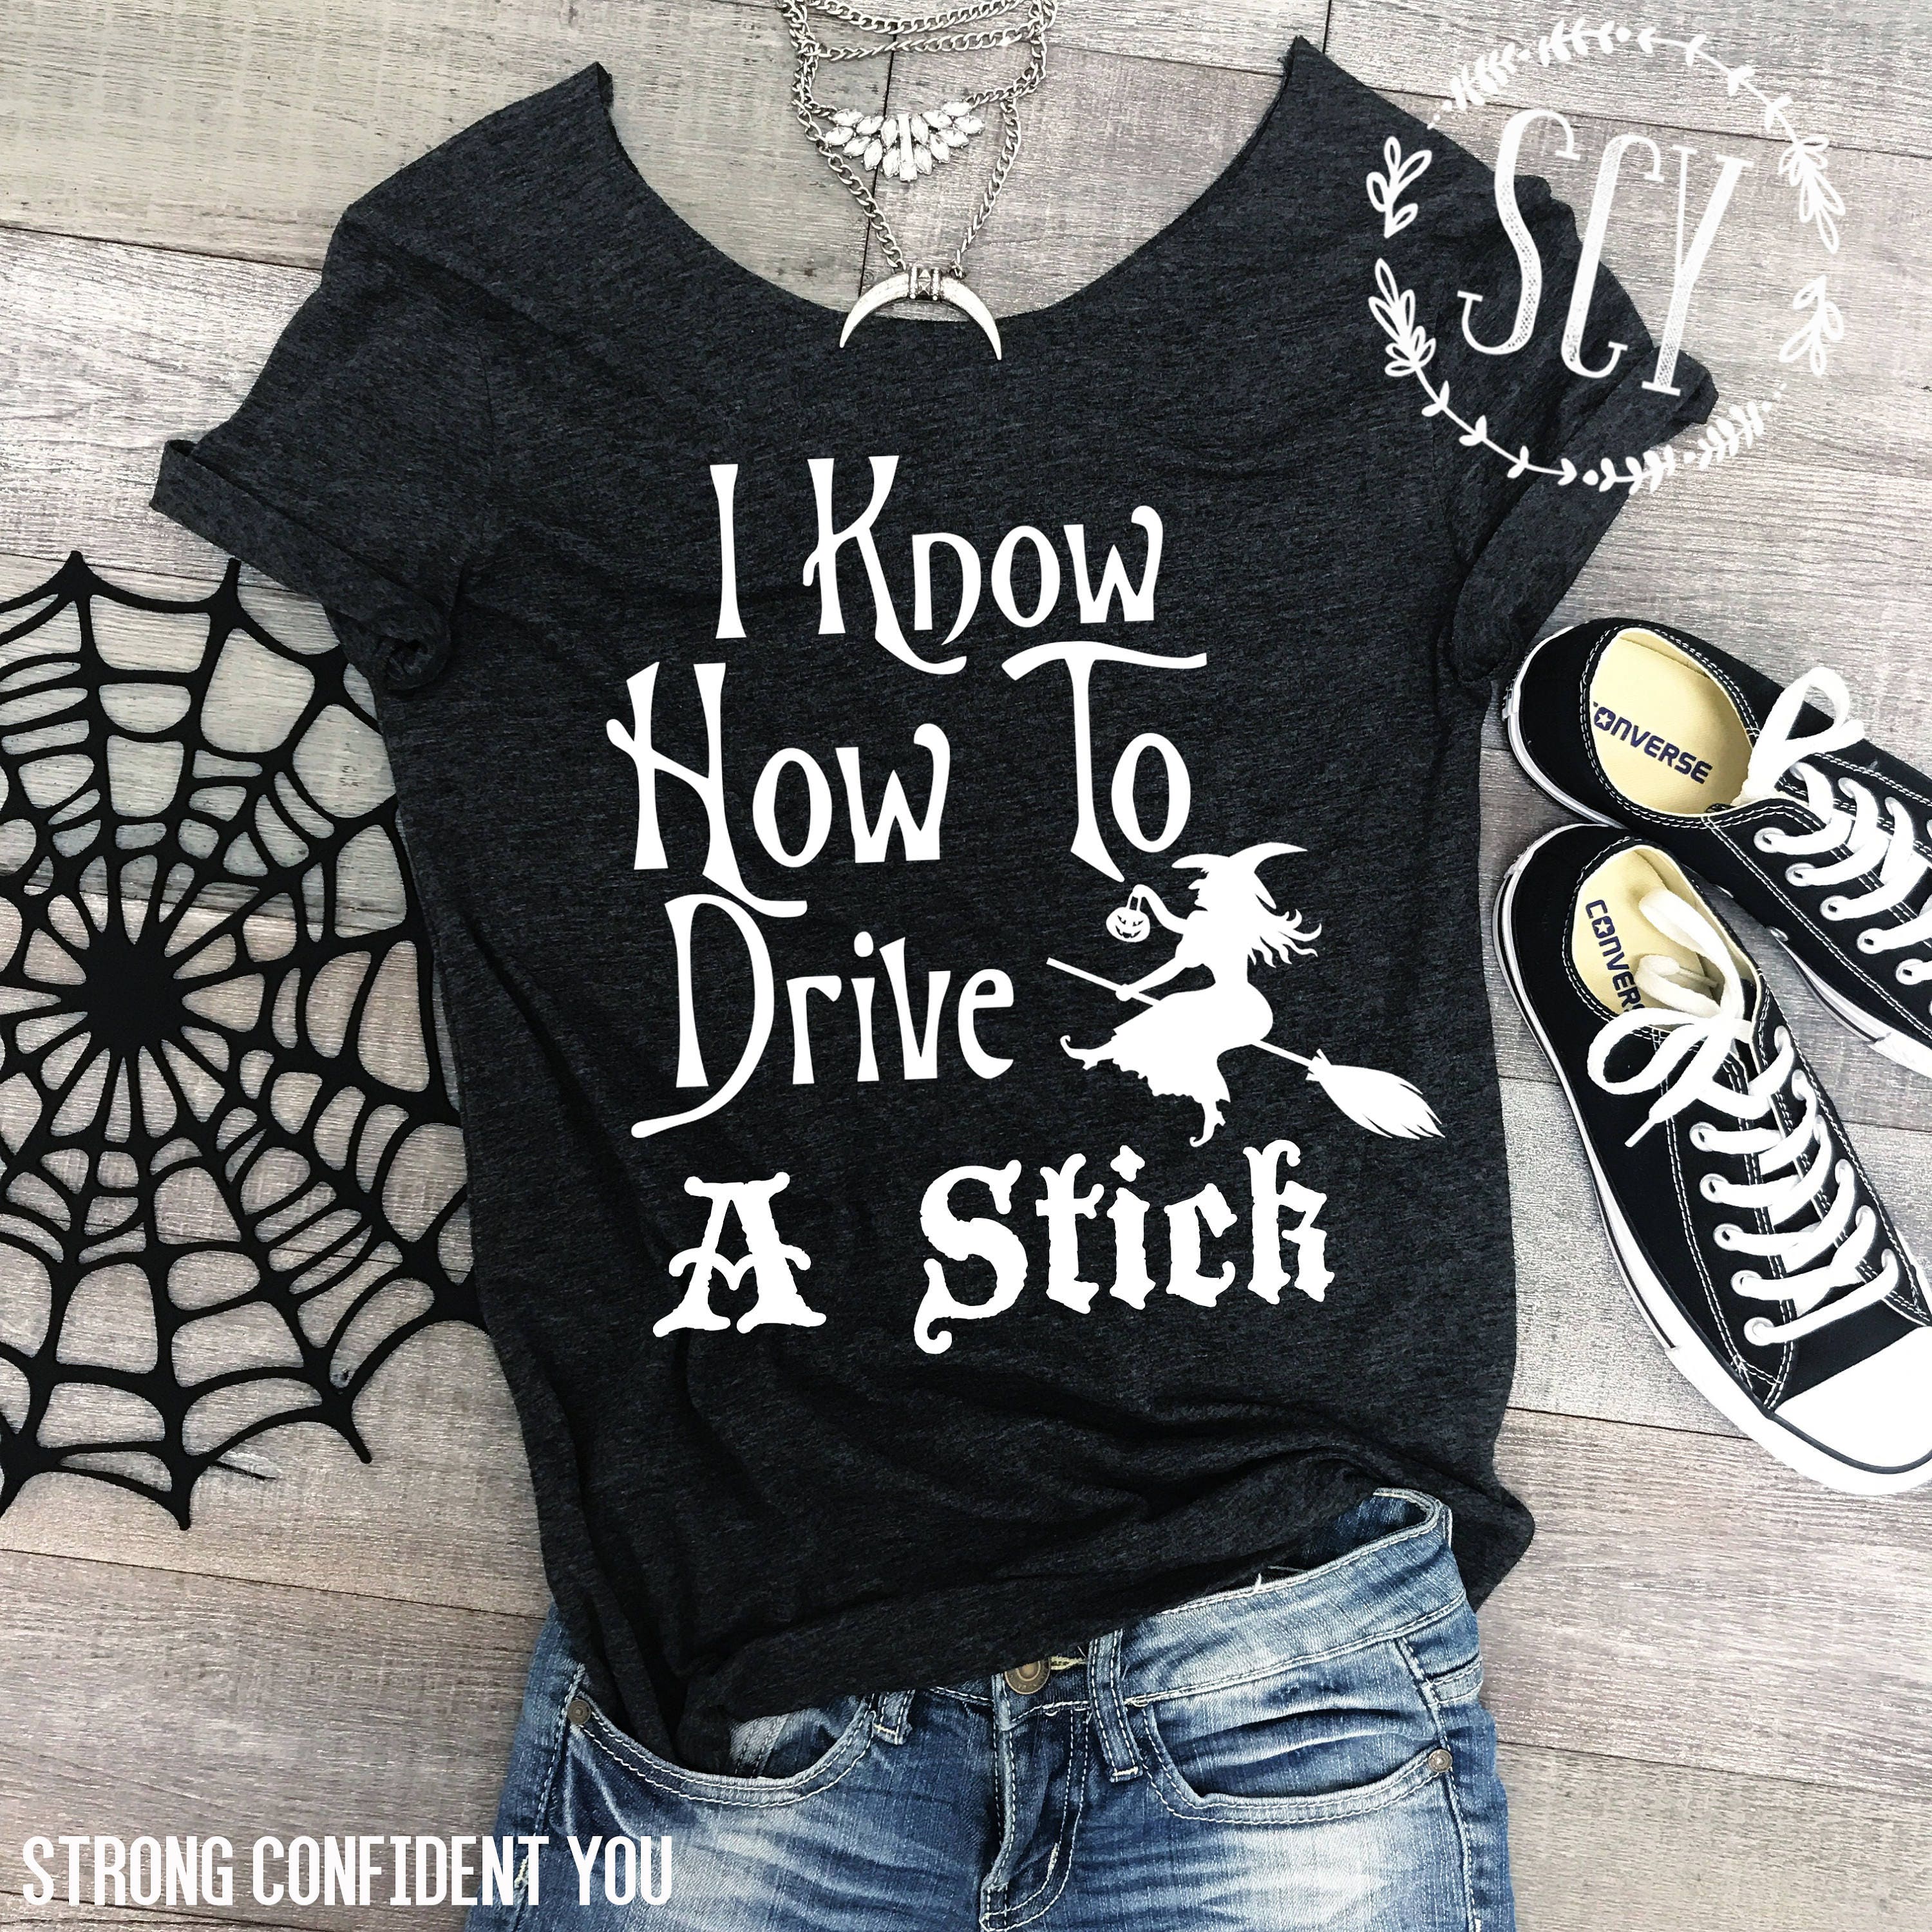 I Know How To Drive A Stick Raw Neck Tee Shirt - Halloween Tee Shirt - Halloween Top = Funny Halloween TShirt